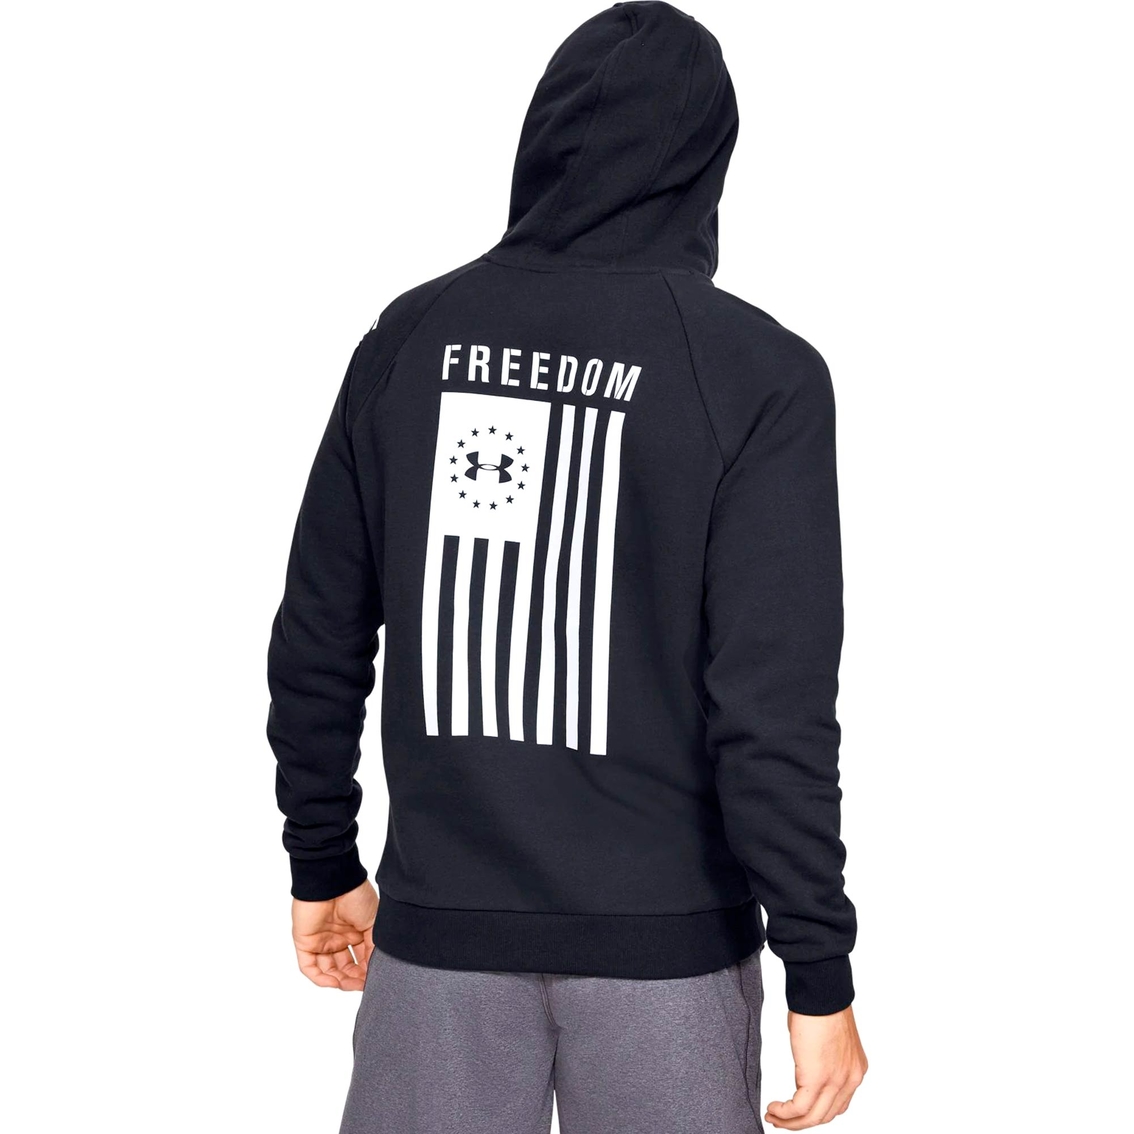 Freedom Flag Rival PO Hoodie - Image 2 of 6